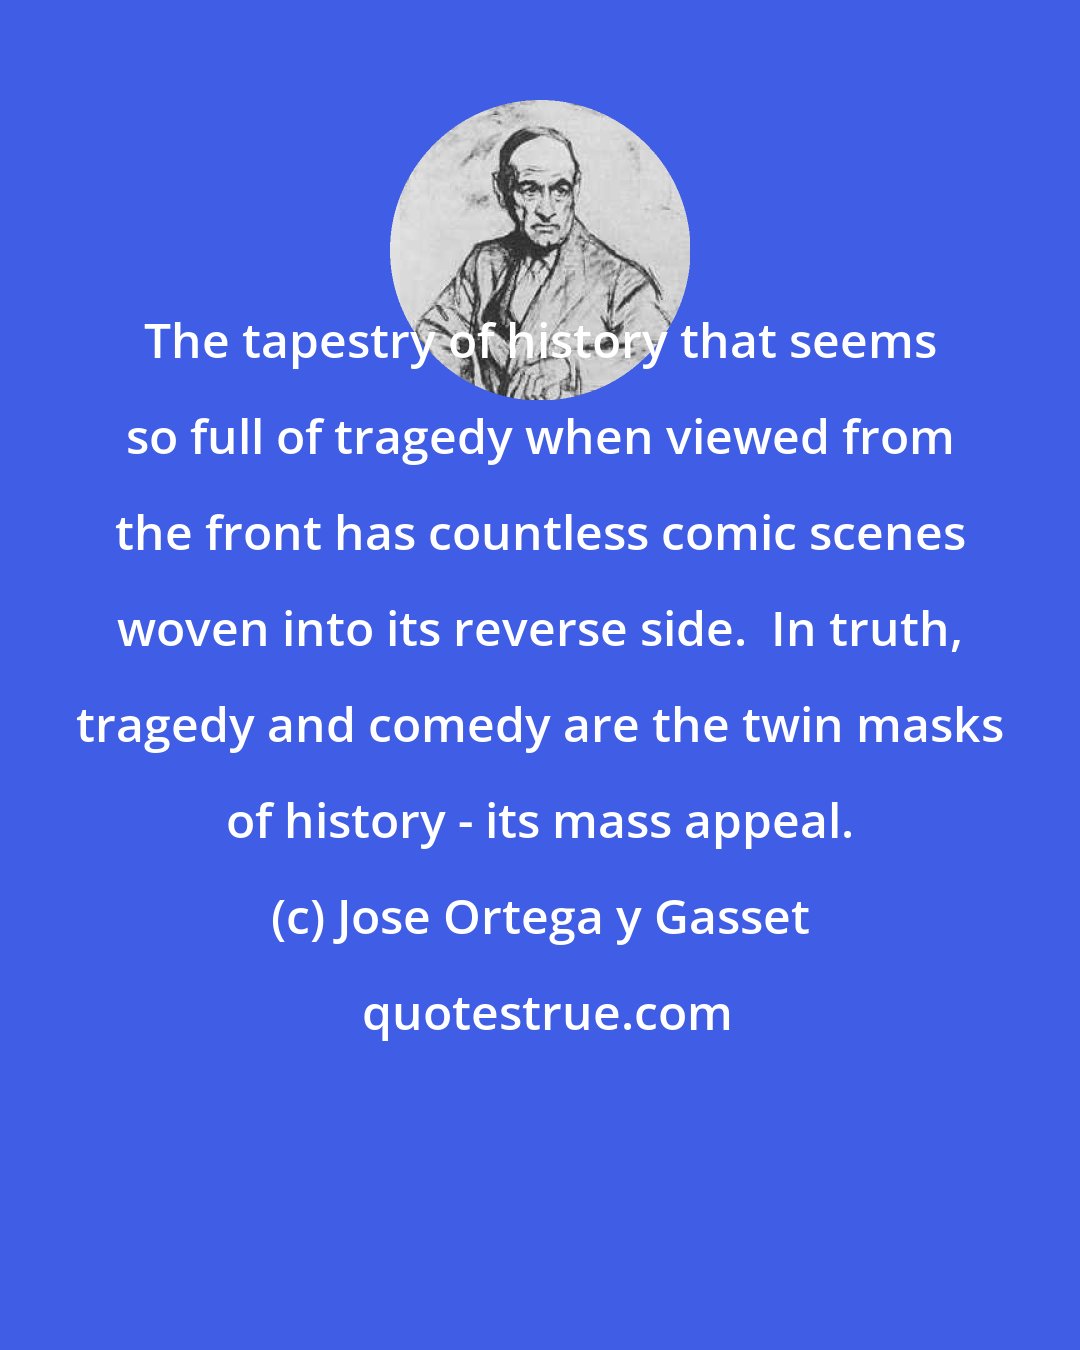 Jose Ortega y Gasset: The tapestry of history that seems so full of tragedy when viewed from the front has countless comic scenes woven into its reverse side.  In truth, tragedy and comedy are the twin masks of history - its mass appeal.